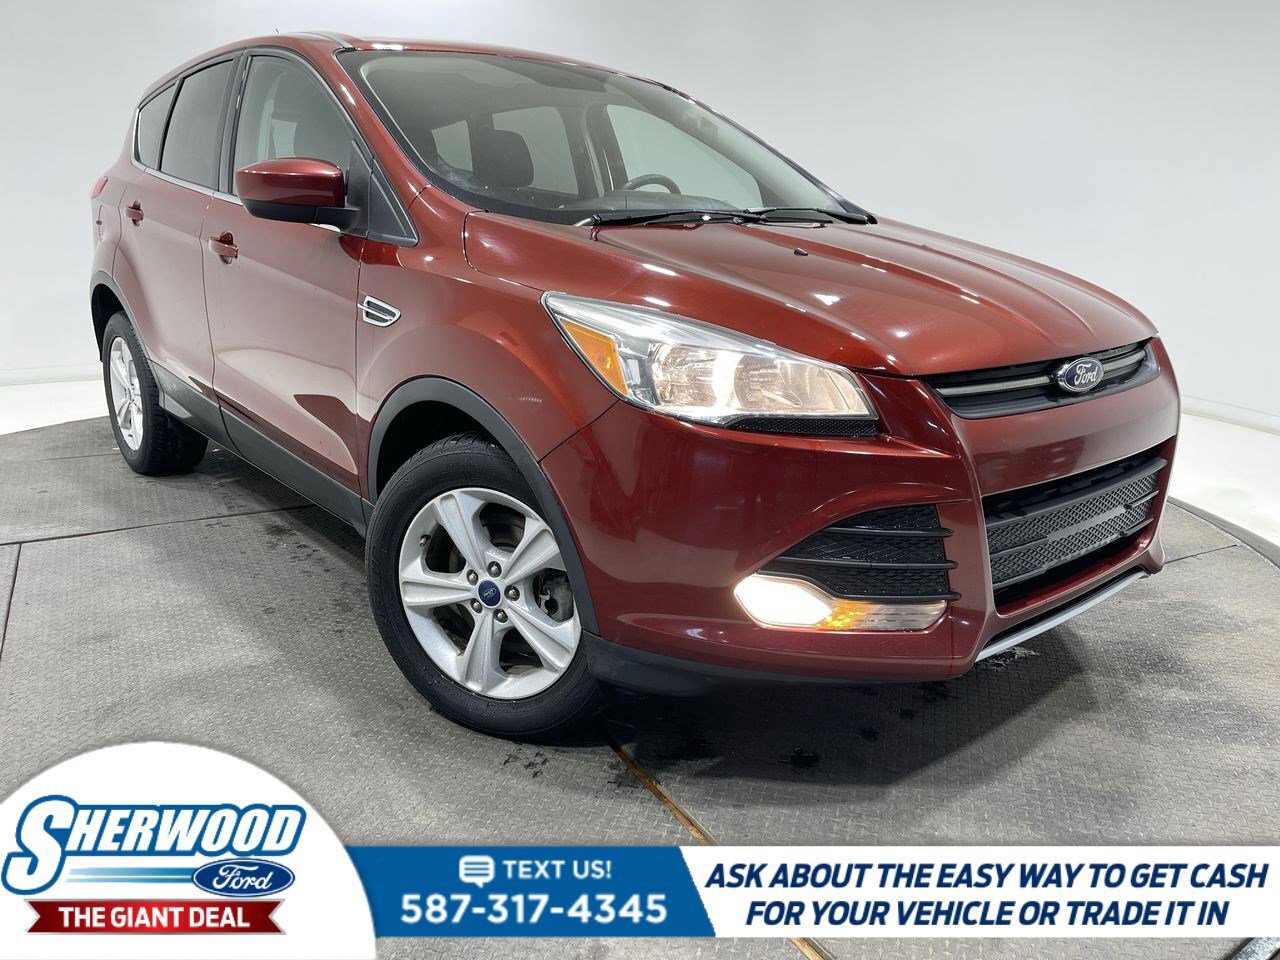 2014 Ford Escape SE- $0 Down $150 Weekly- CLEAN CARFAX- 1 OWNER